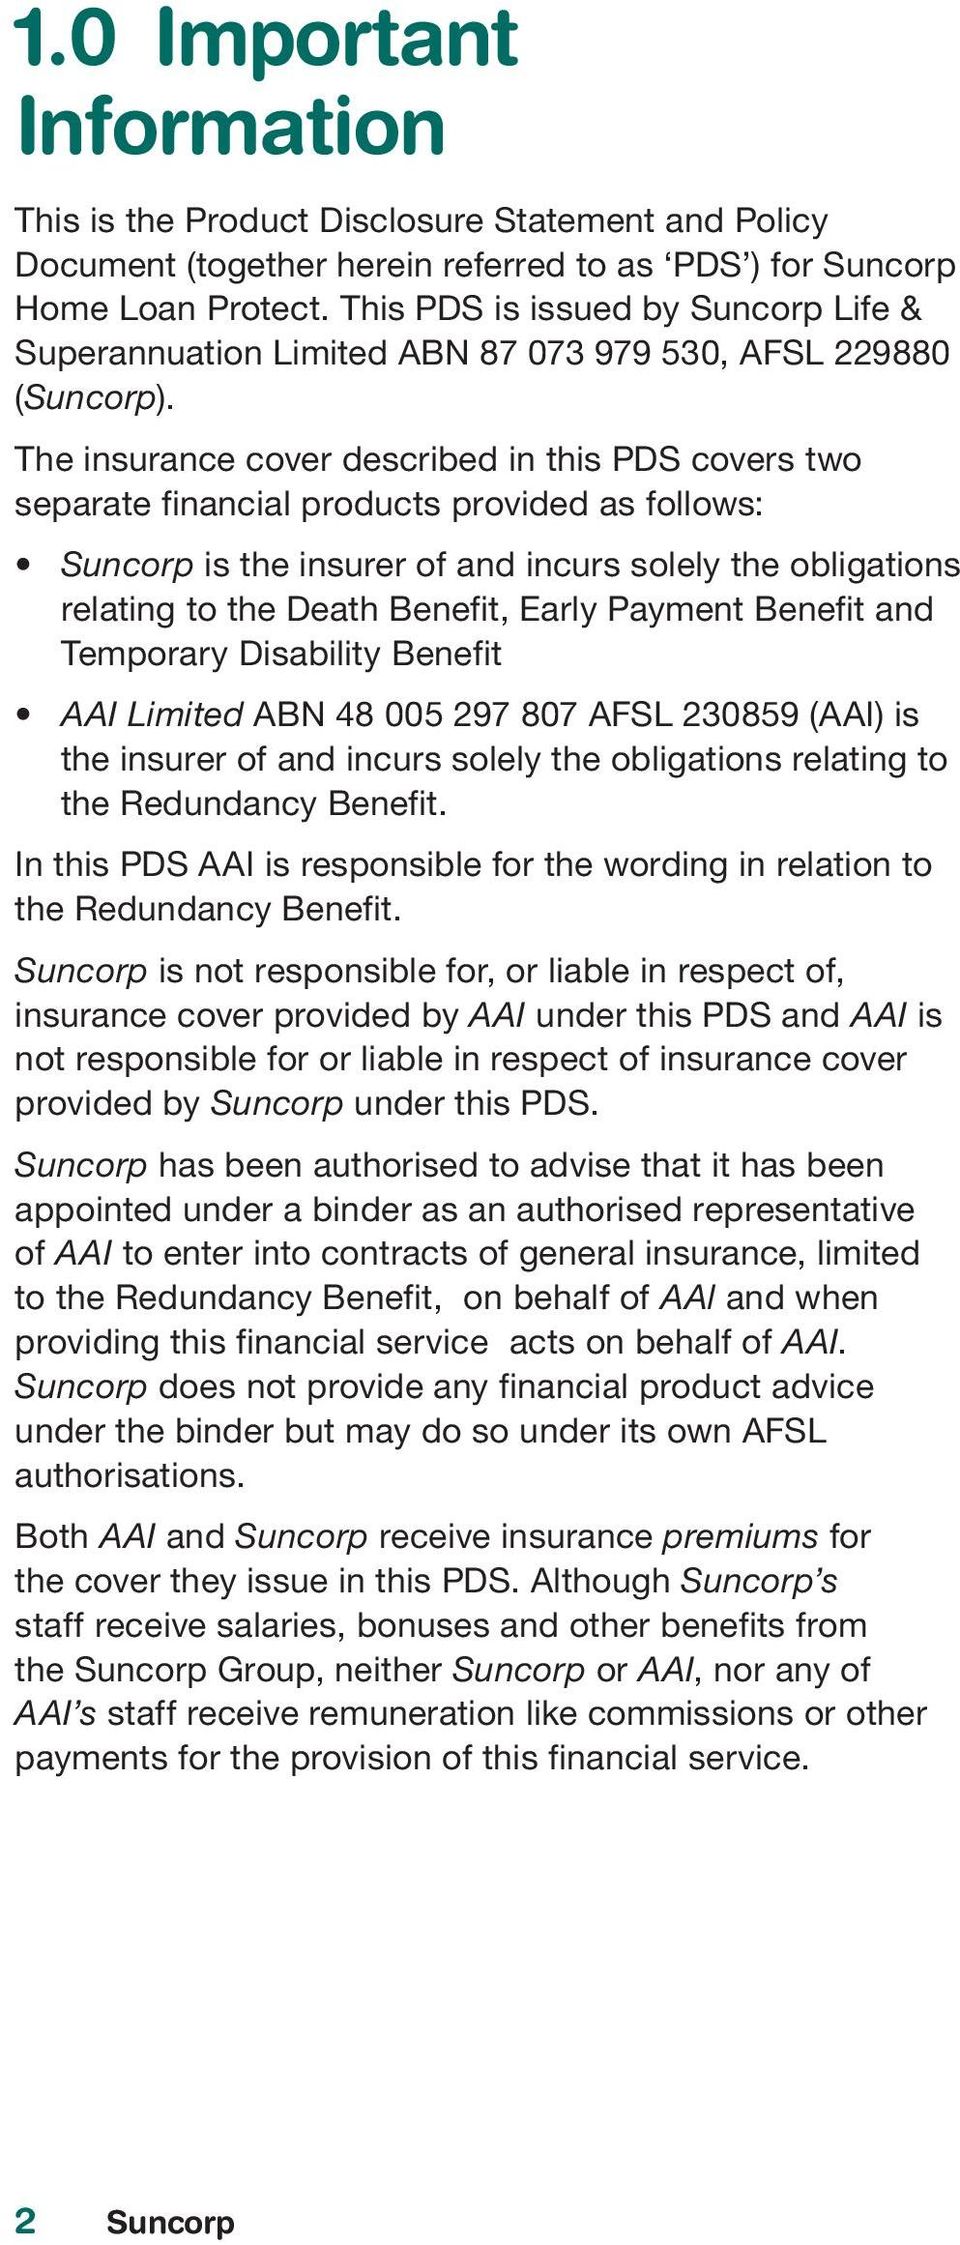 The insurance cover described in this PDS covers two separate financial products provided as follows: Suncorp is the insurer of and incurs solely the obligations relating to the Death Benefit, Early